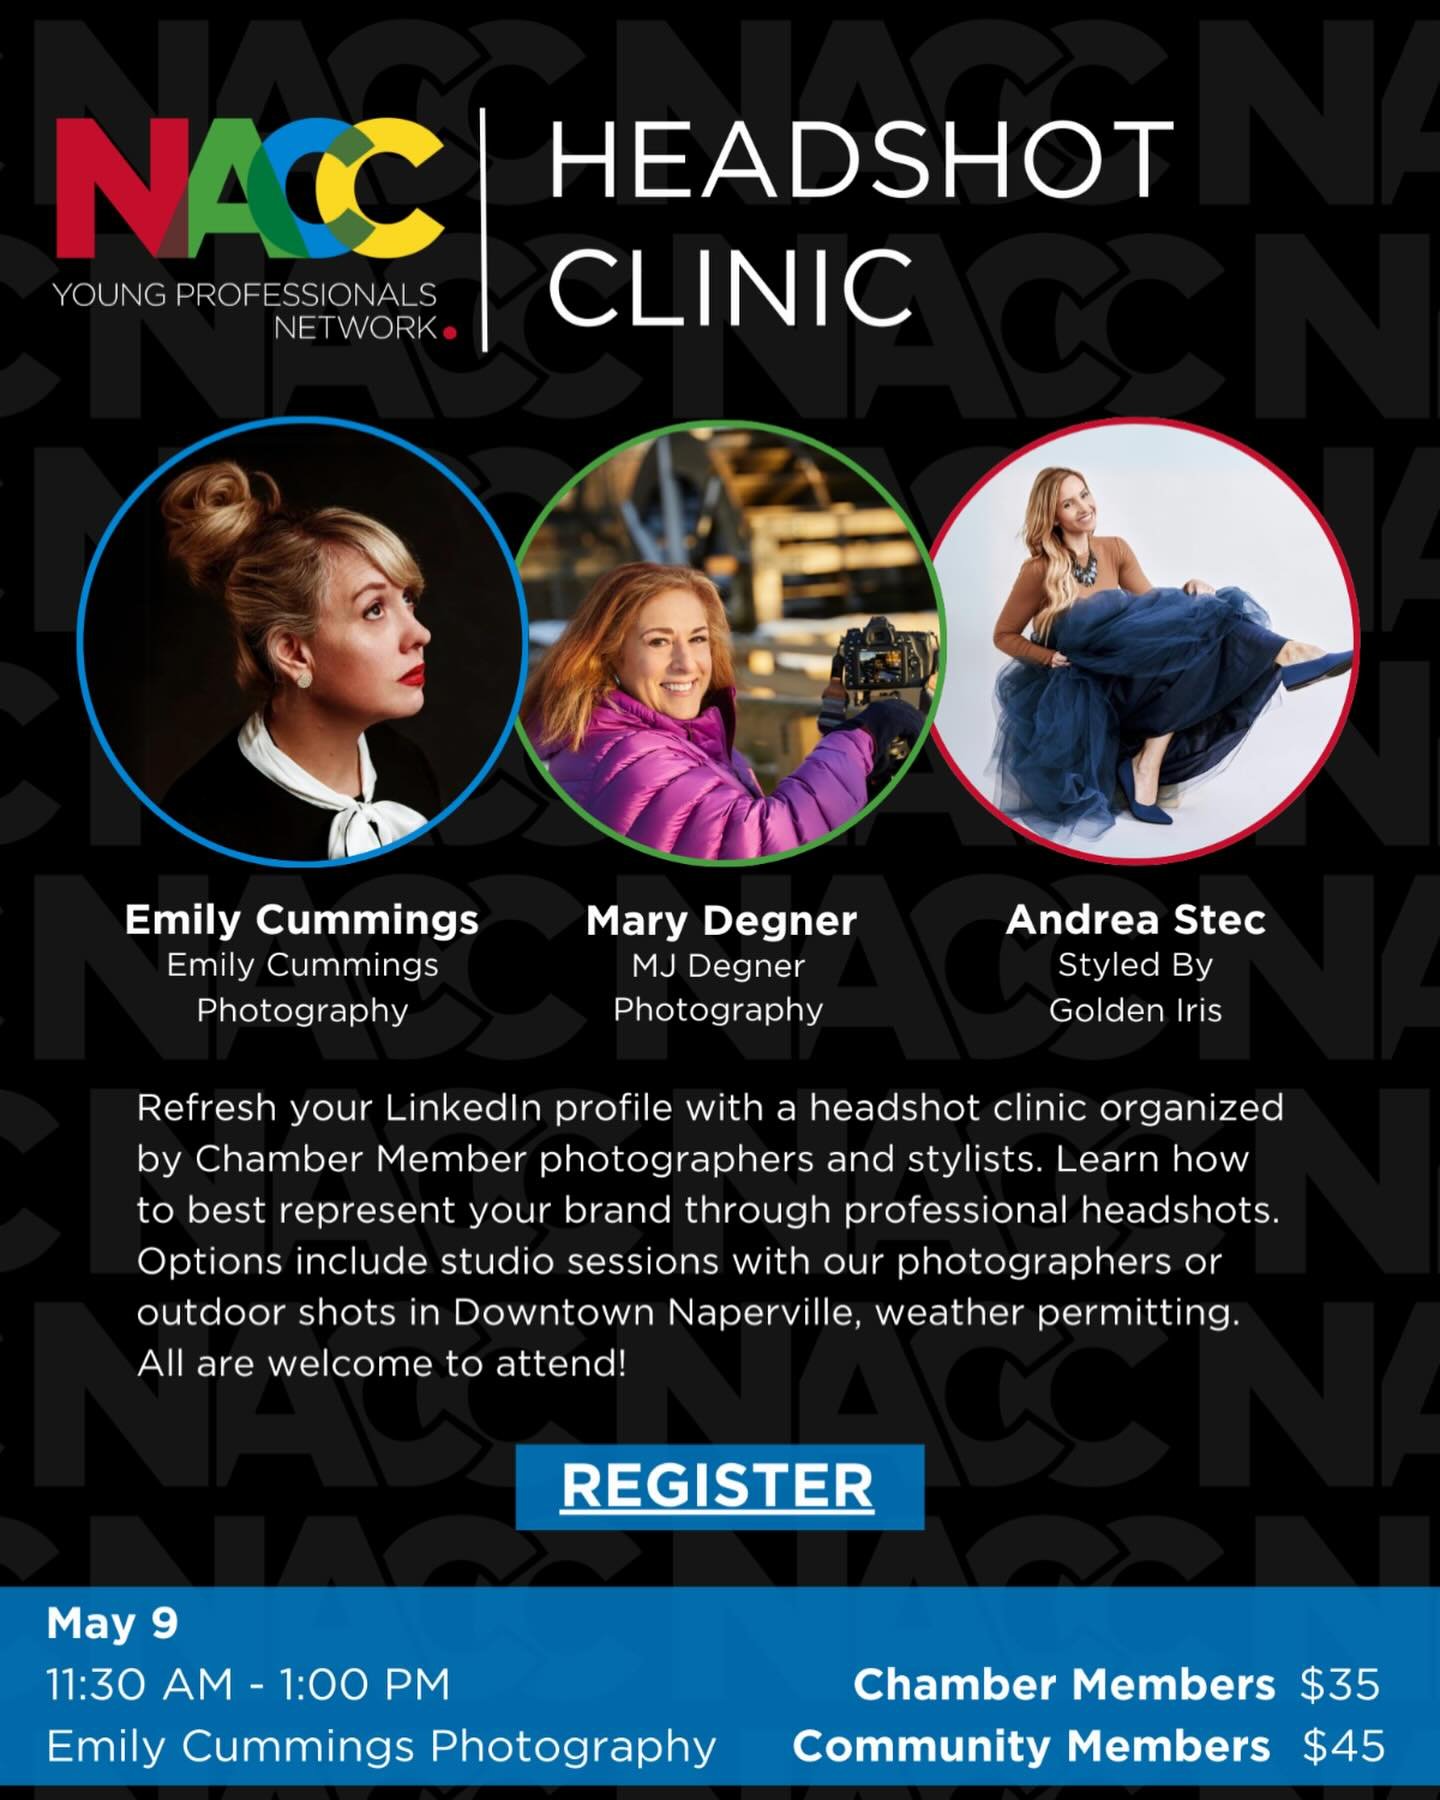 Don&rsquo;t miss the chance to freshen up your professional image at the NACC Headshot Clinic on May 9th at Studio 25 Naperville. Our Chamber Member photographers (yup, including @emilycummingsphotographer!) and stylists are ready to help you shine, 